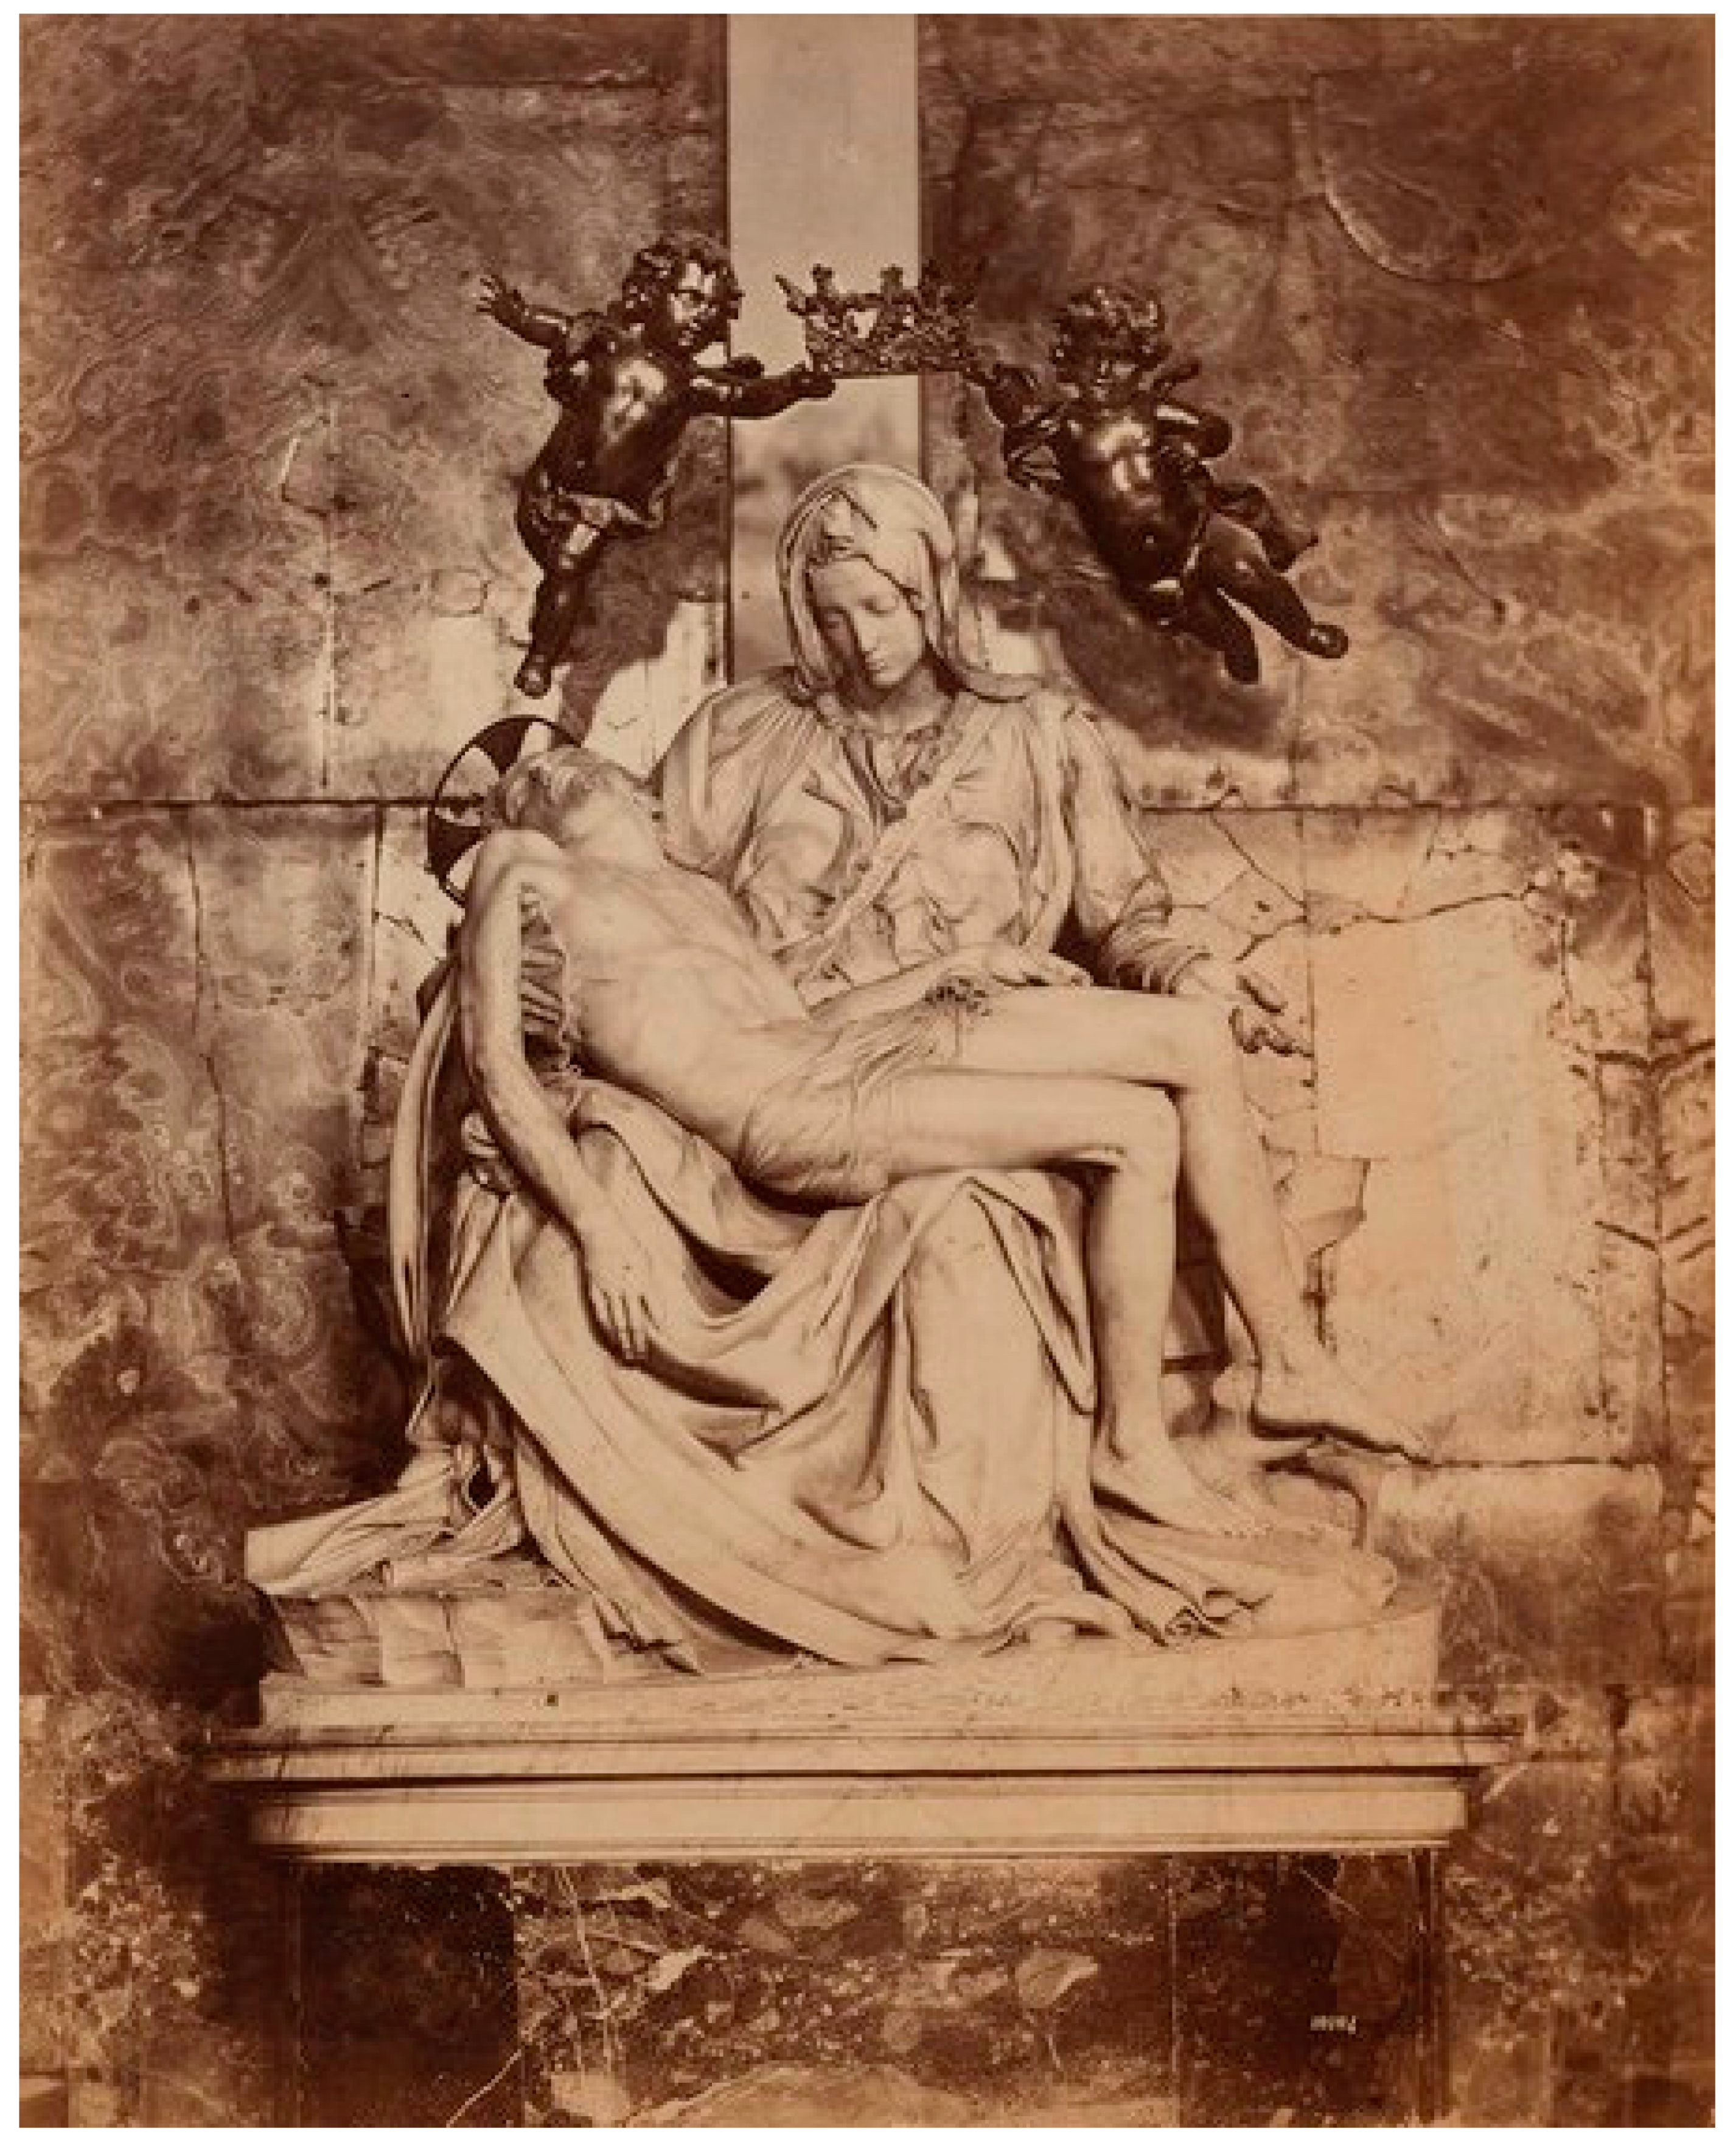 Religions Free Full-Text Masterpieces, Altarpieces, and Devotional Prints Close and Distant Encounters with Michelangelos Vatican Pietà pic pic